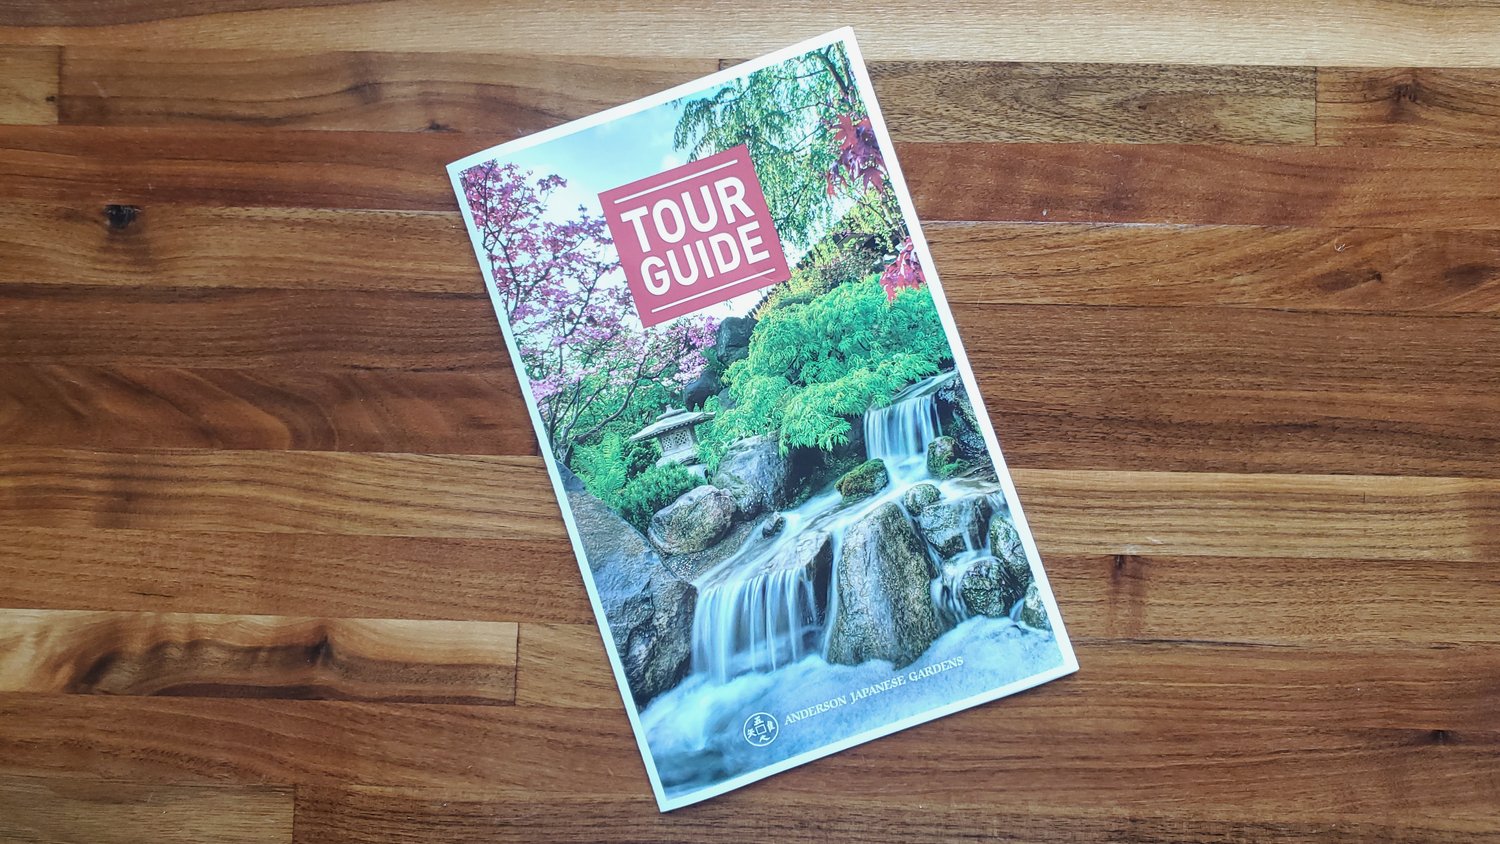 Tour Guide for the Anderson Japanese Gardens.